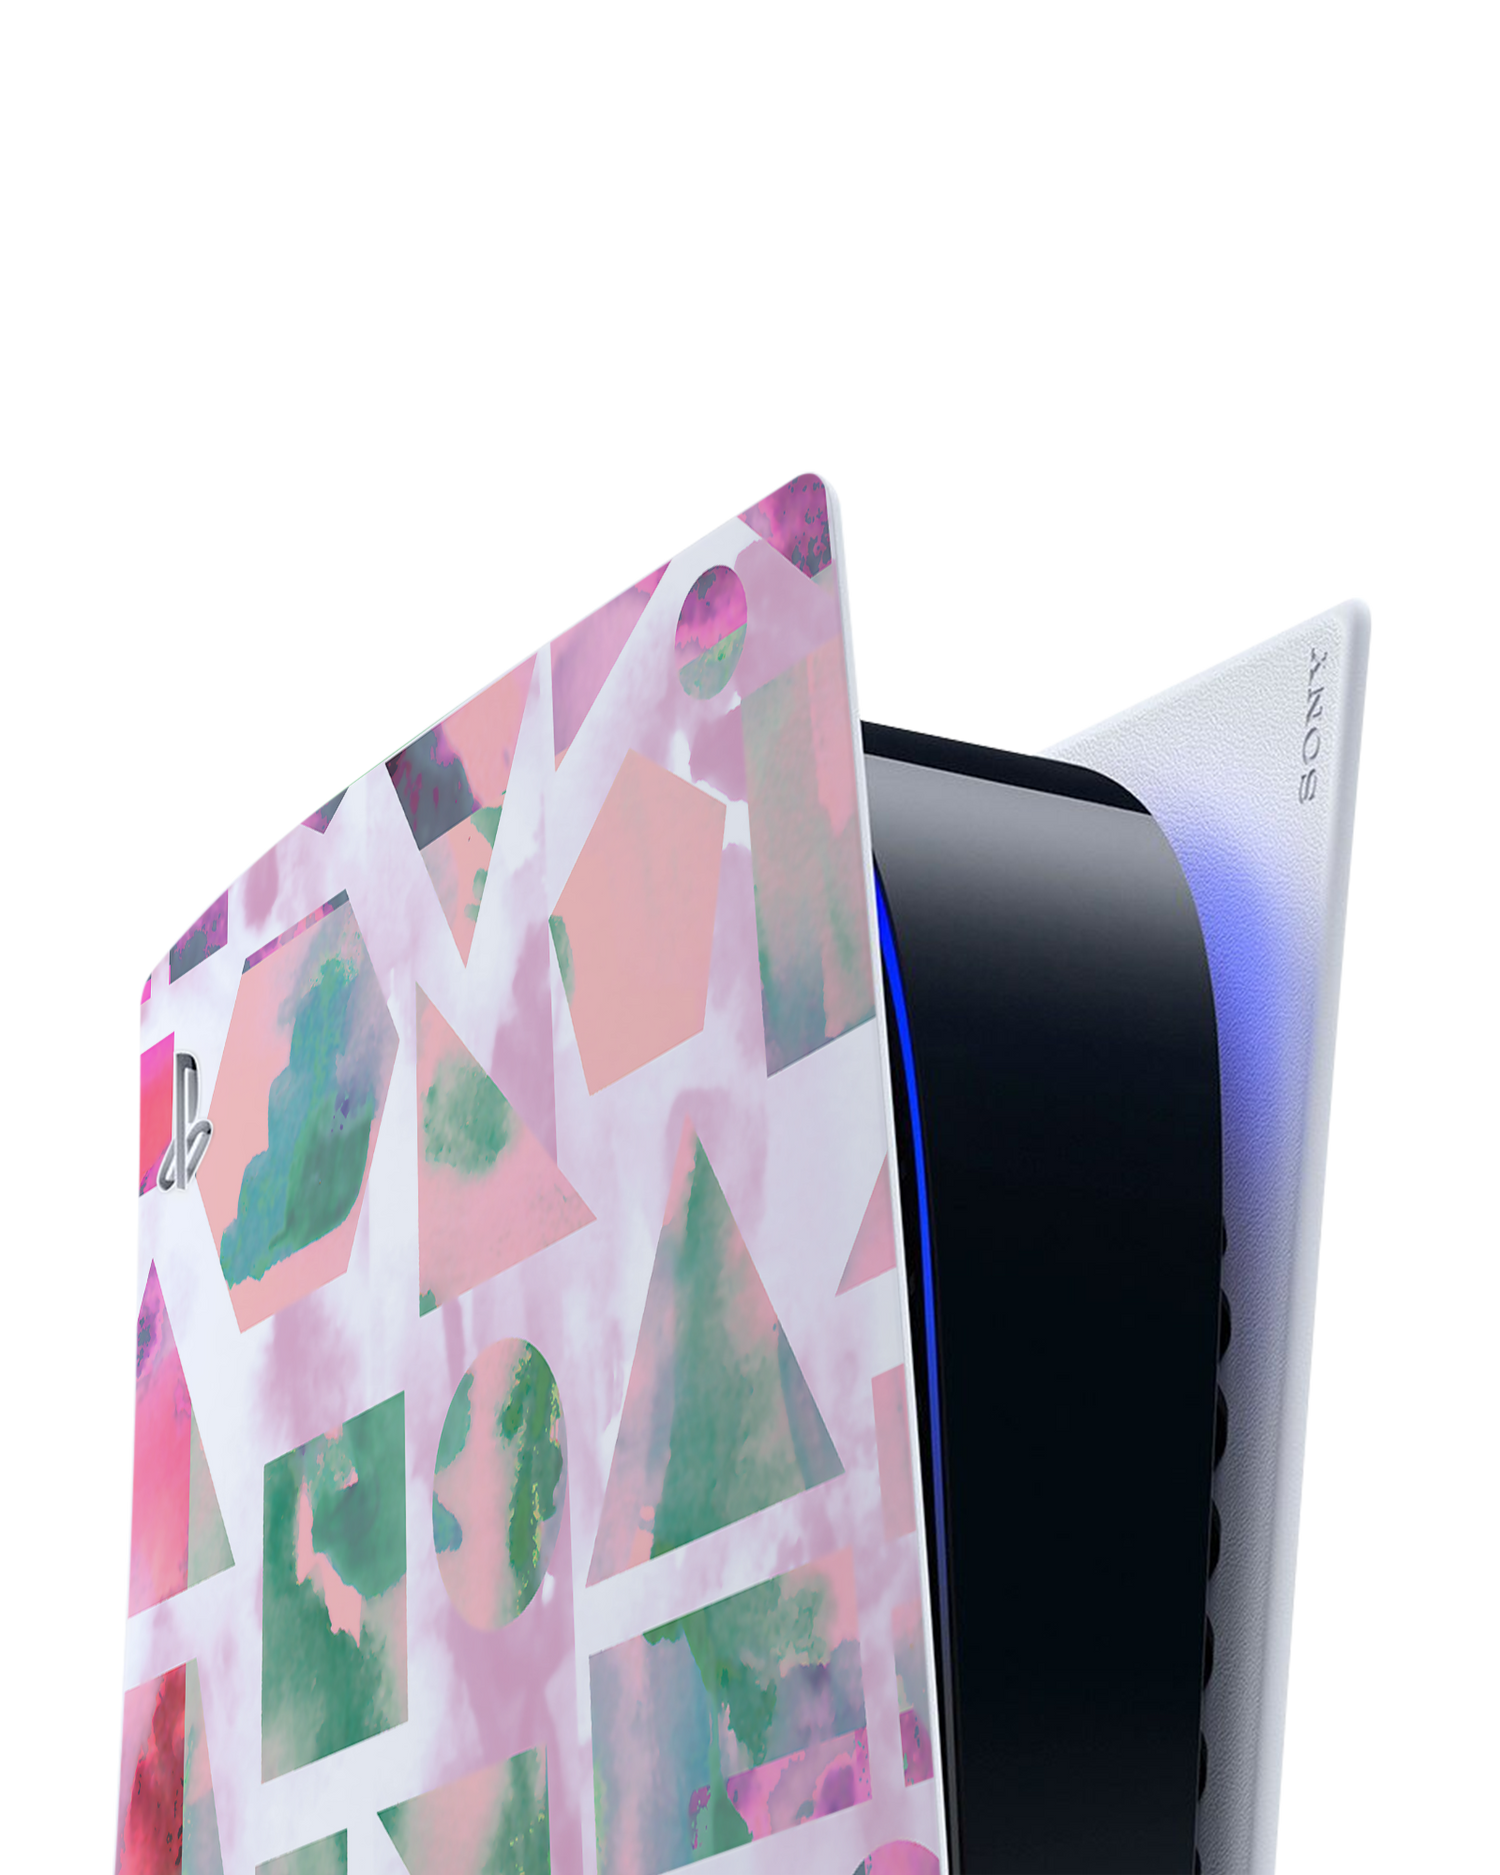 Dreamscapes Console Skin for Sony PlayStation 5: Detail shot